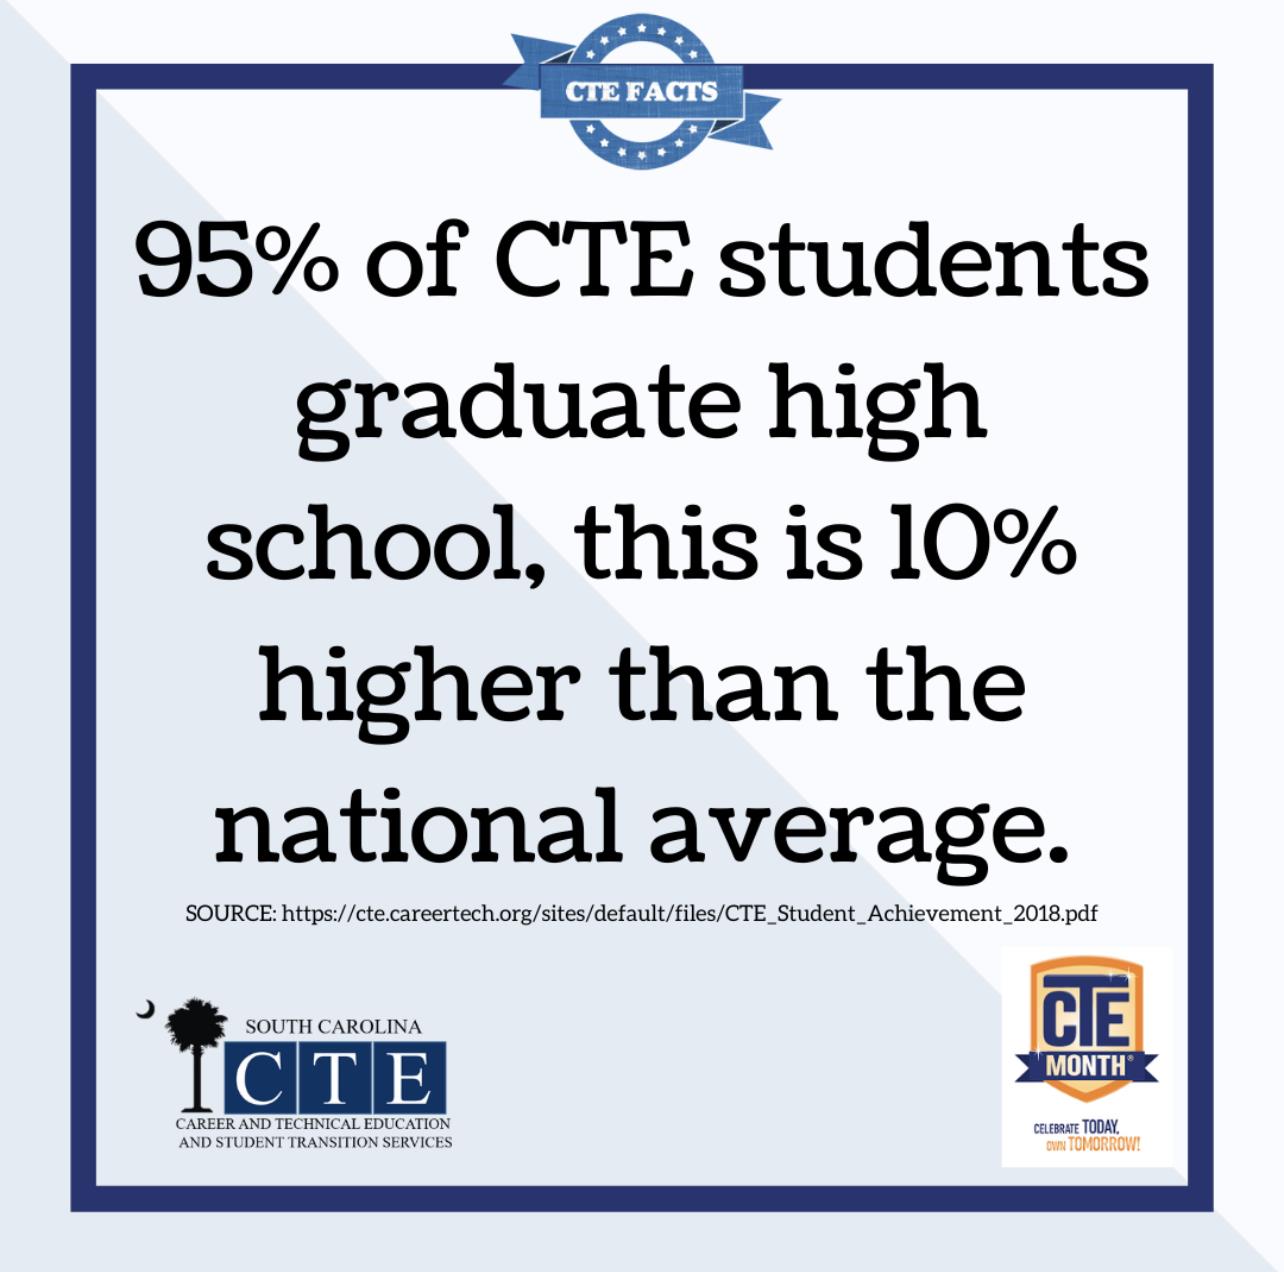 95% of CTE students graduate high school, this is 10% higher than the national average.